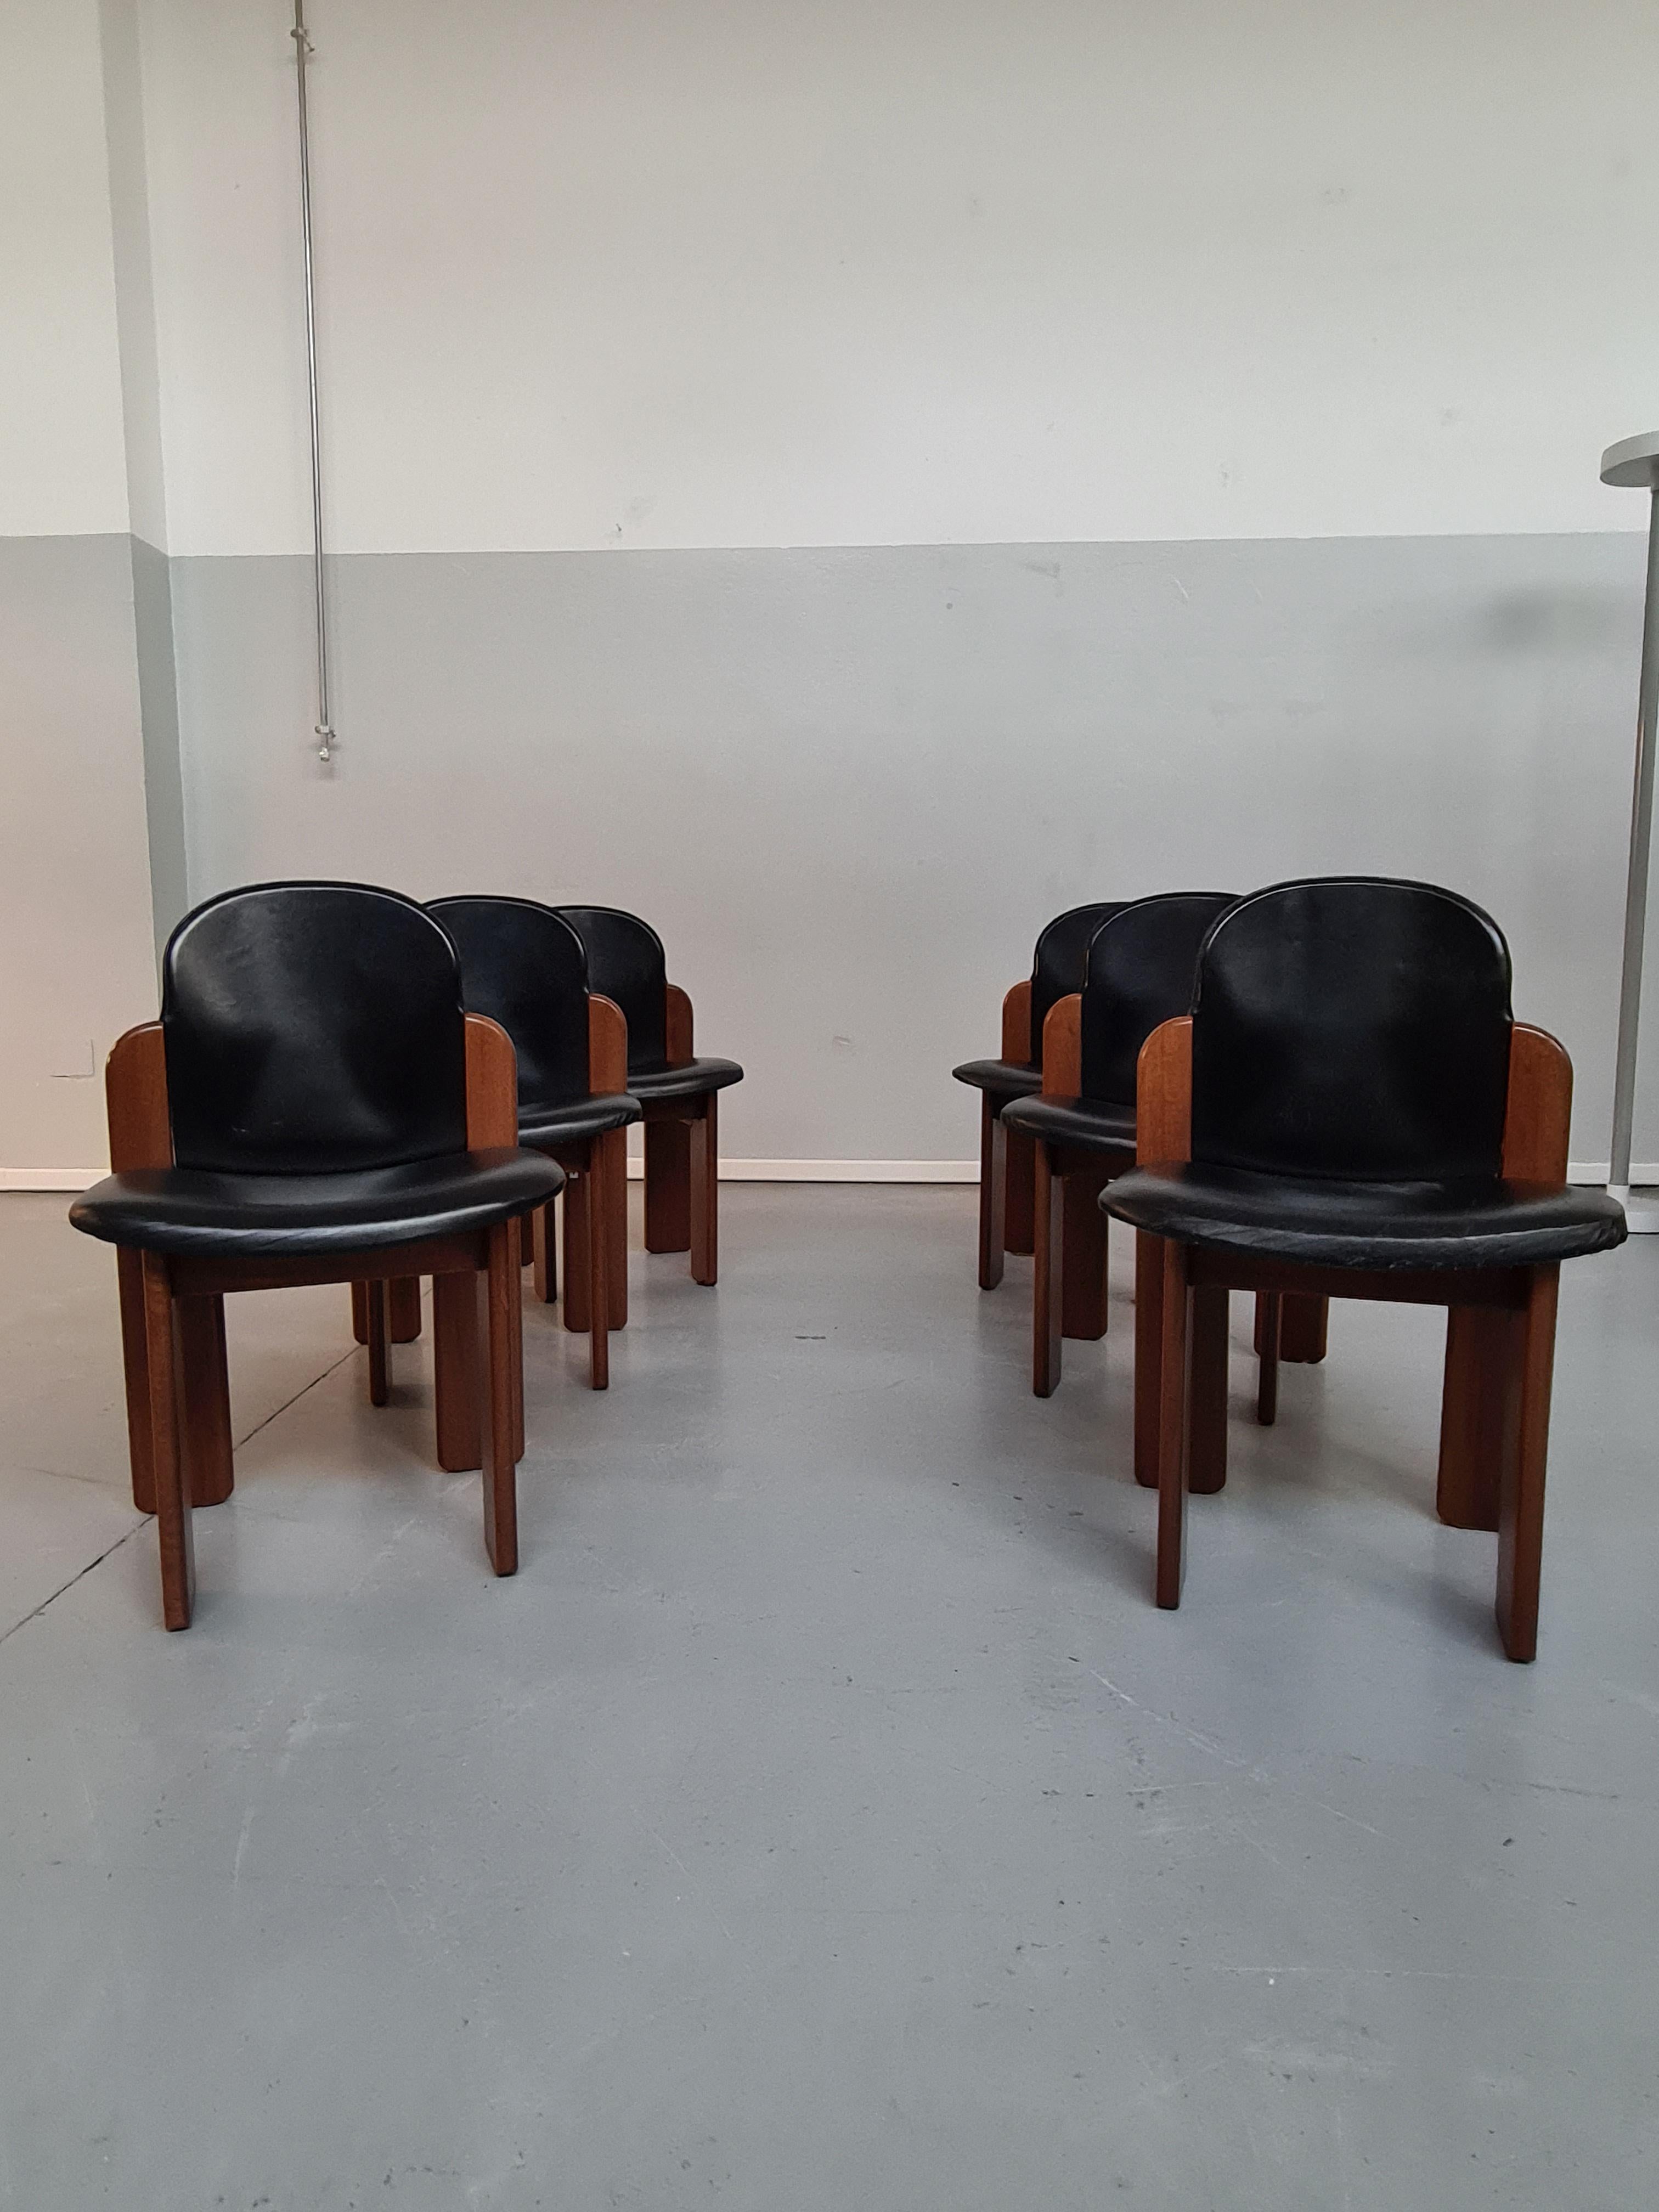 Italian Leather and Beech Chairs and Table by Coppola for F.lli Montina, 1960s
Set of 6 model 330 chairs and a model 303 table by the Italian designer Silvio Coppola.
The base of the chairs is made up of four straight legs, two in the vertical